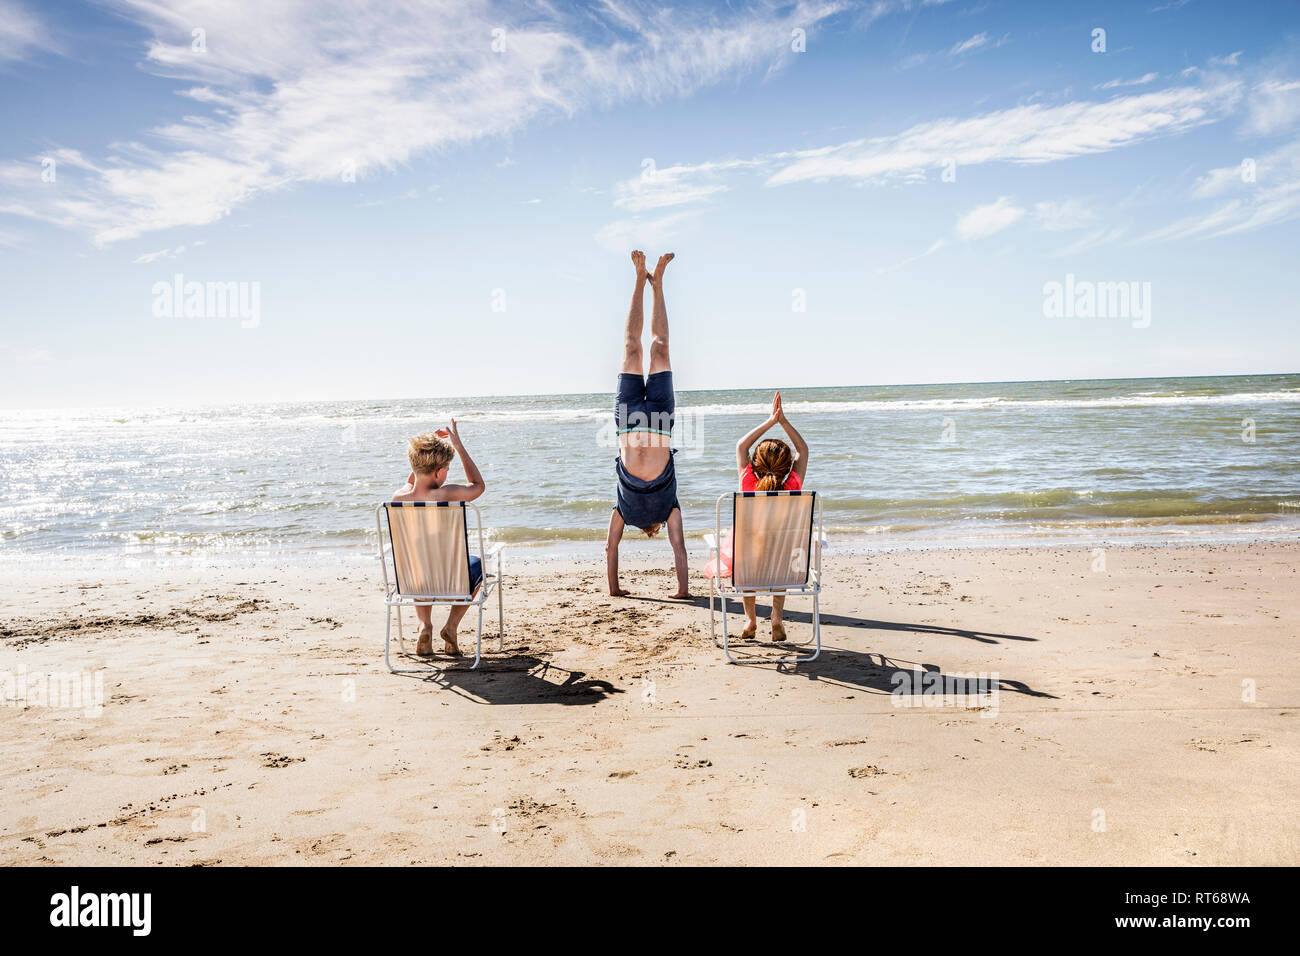 Netherlands, Zandvoort, children clapping hands for father doing a handstand on the beach Stock Photo